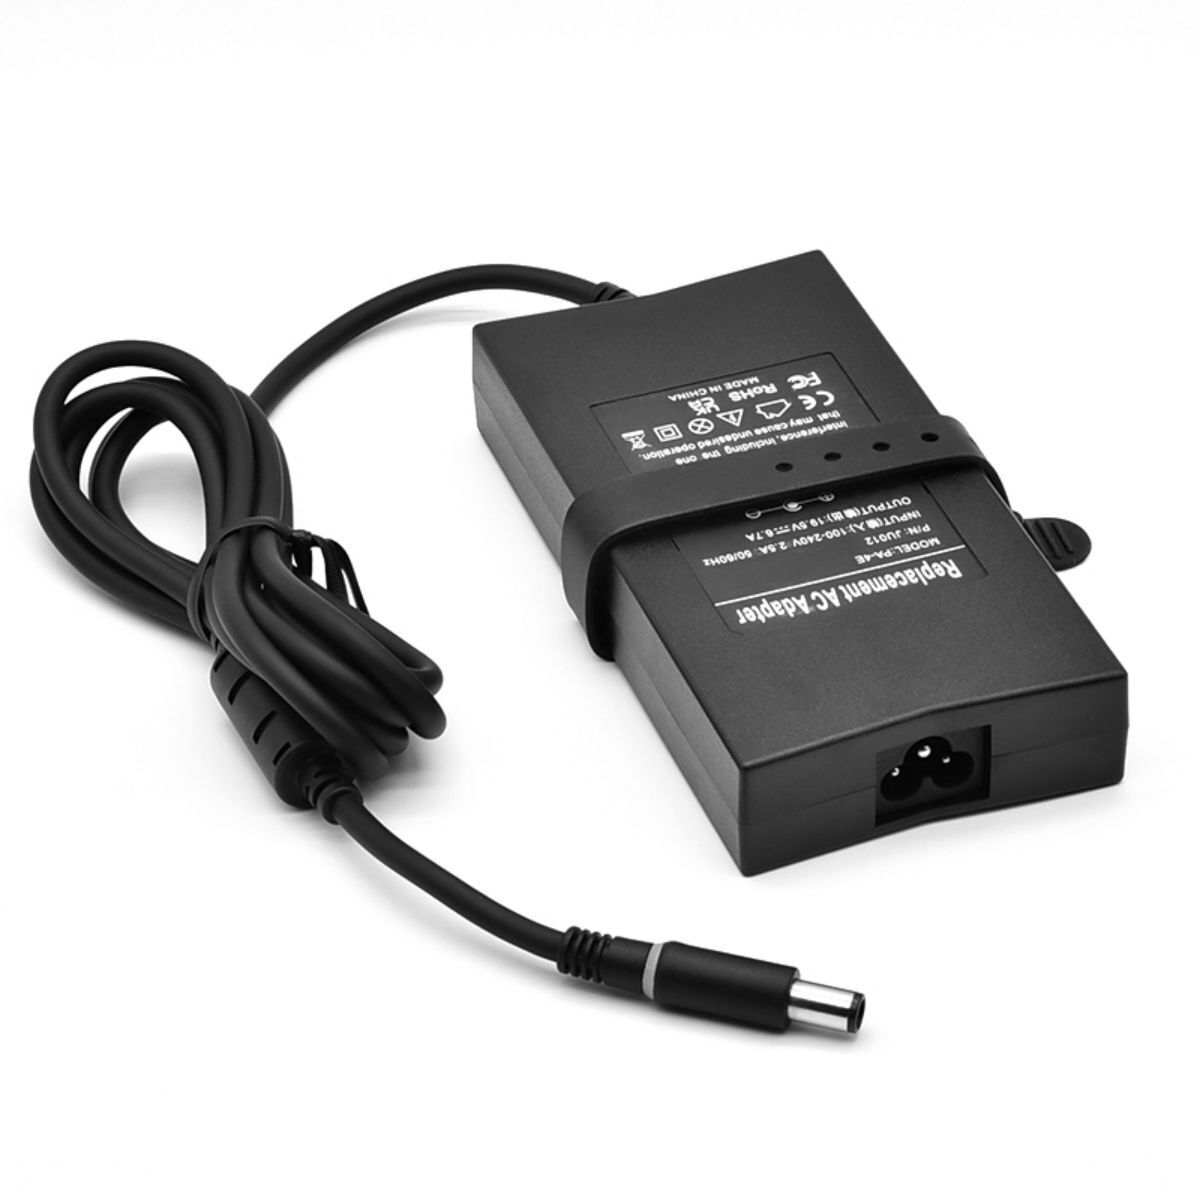 FOR Dell Alienware M18X R3 i7-4930MX 130W-330W AC Power Adapter Charger US Cord